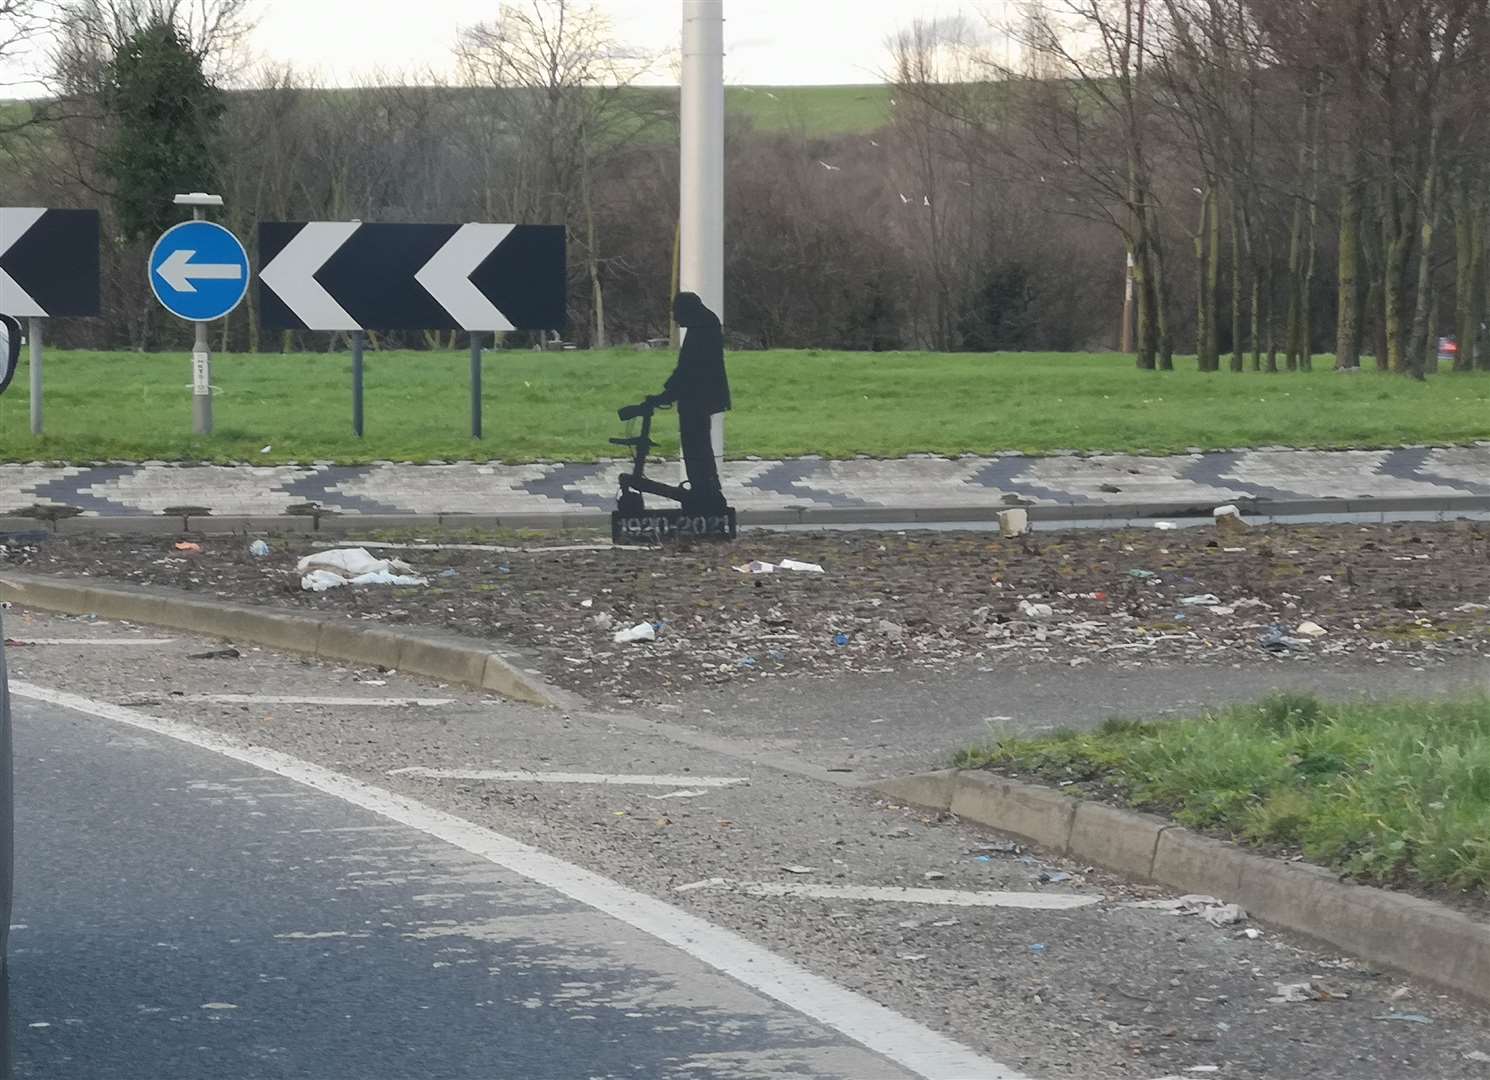 Mysterious new artwork commemorating Captain Tom Moore has appeared at the roundabout in Medway